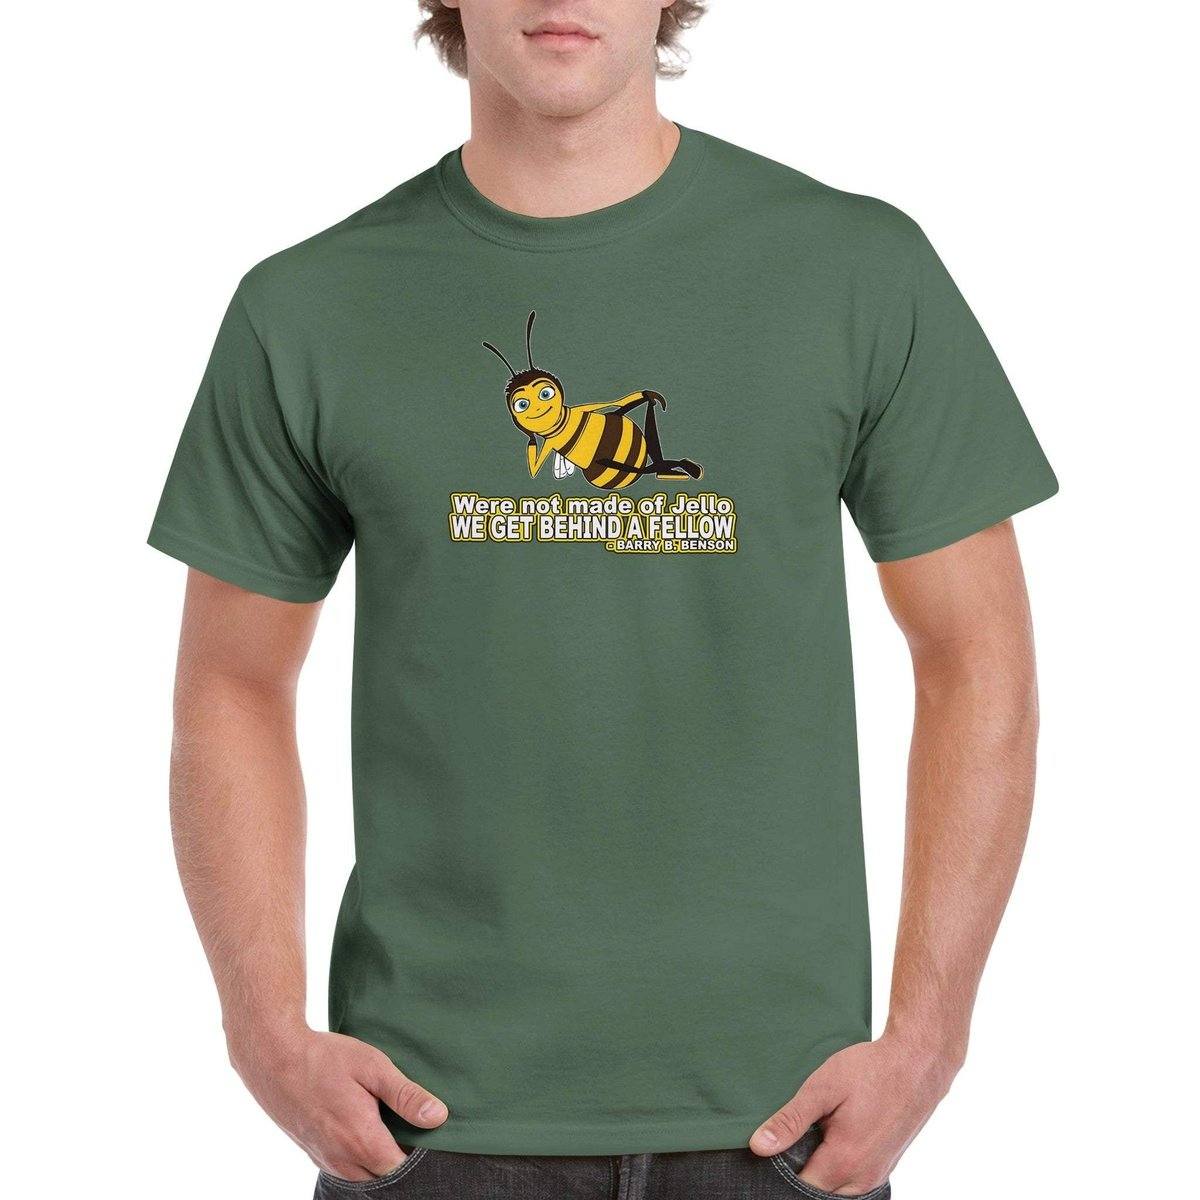 Were not made of Jello - Bee Movie T-Shirt - Bee movie Tshirt - Unisex Crewneck T-shirt Australia Online Color Military Green / S